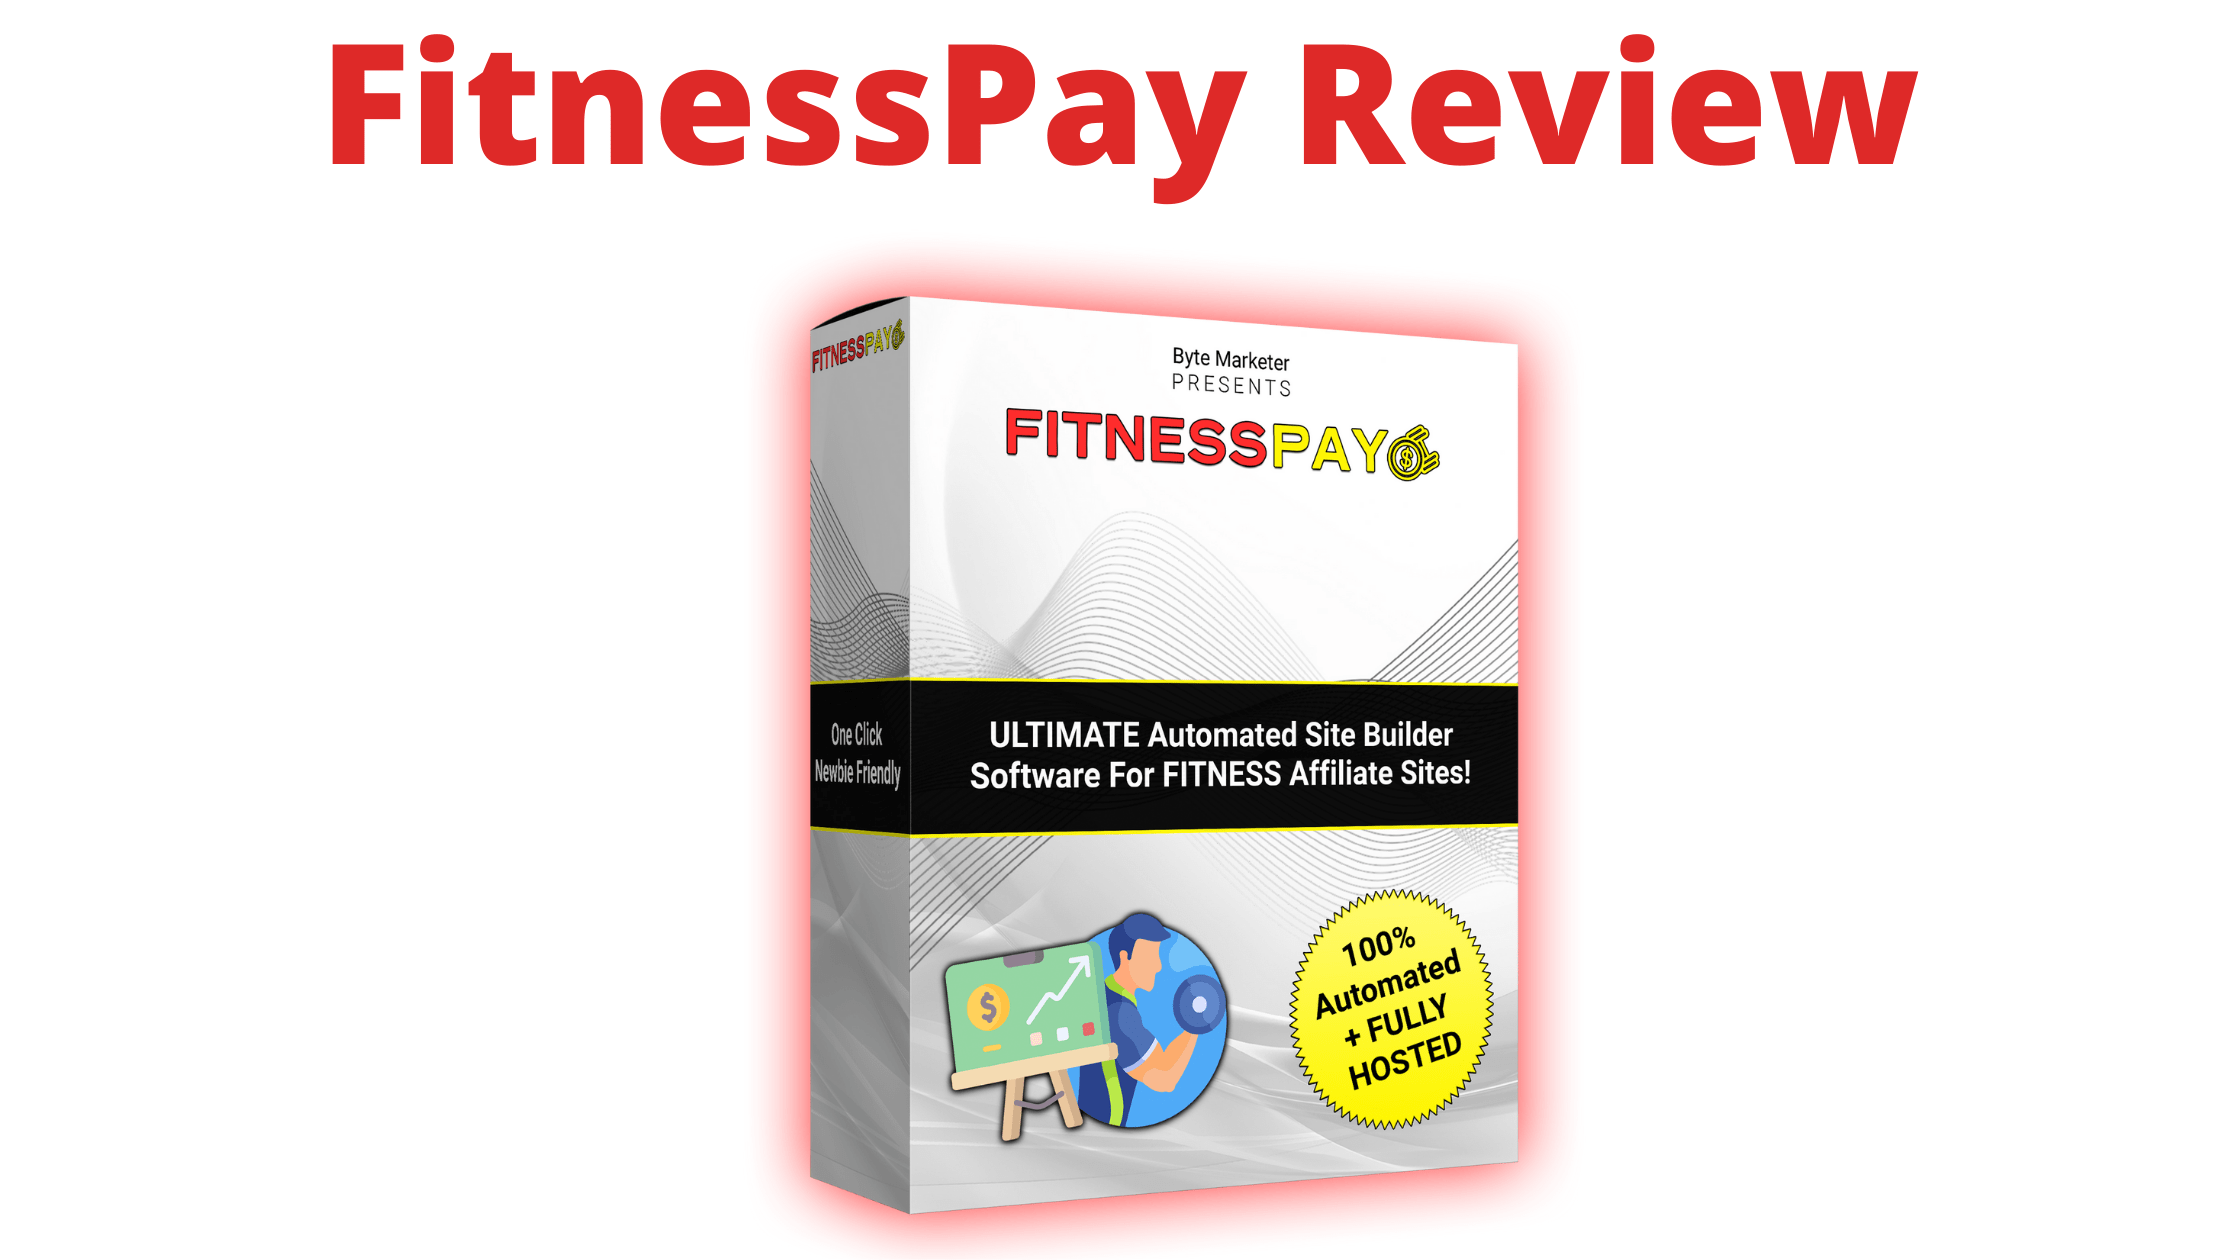 FitnessPay Review